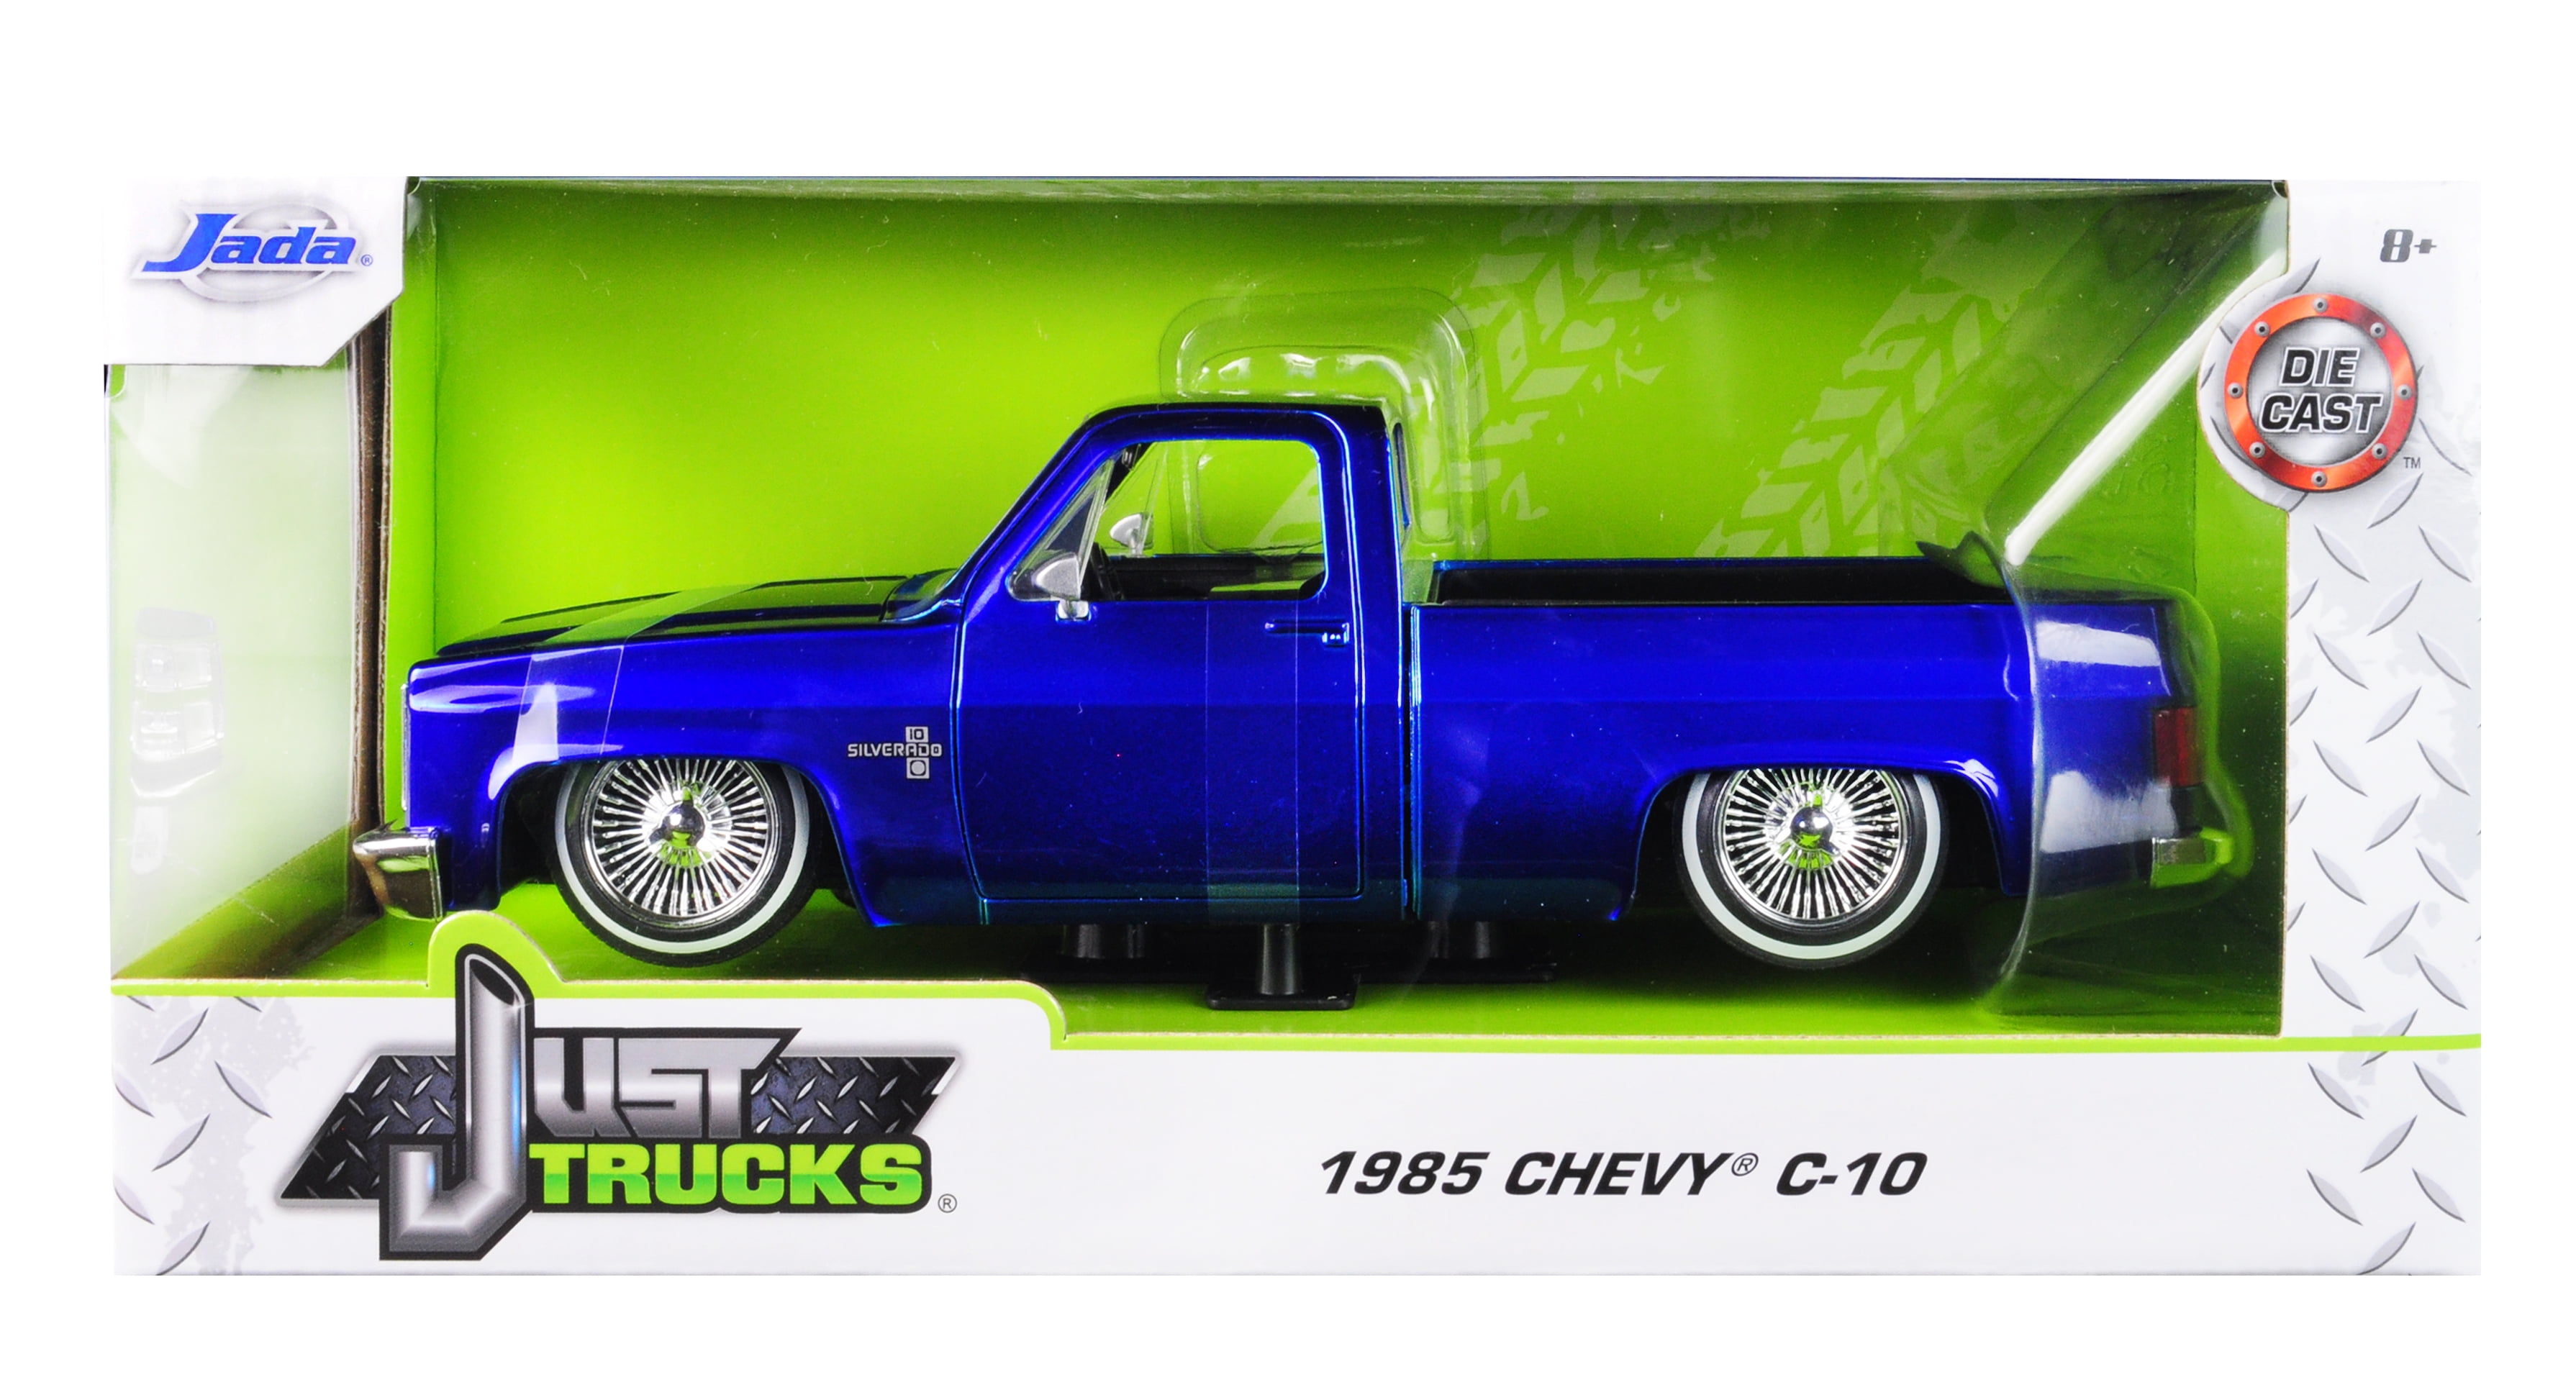 1985 Chevy C-10 Pickup Truck Diecast 1:24 Jada Toys 8 inch Blue with Rims